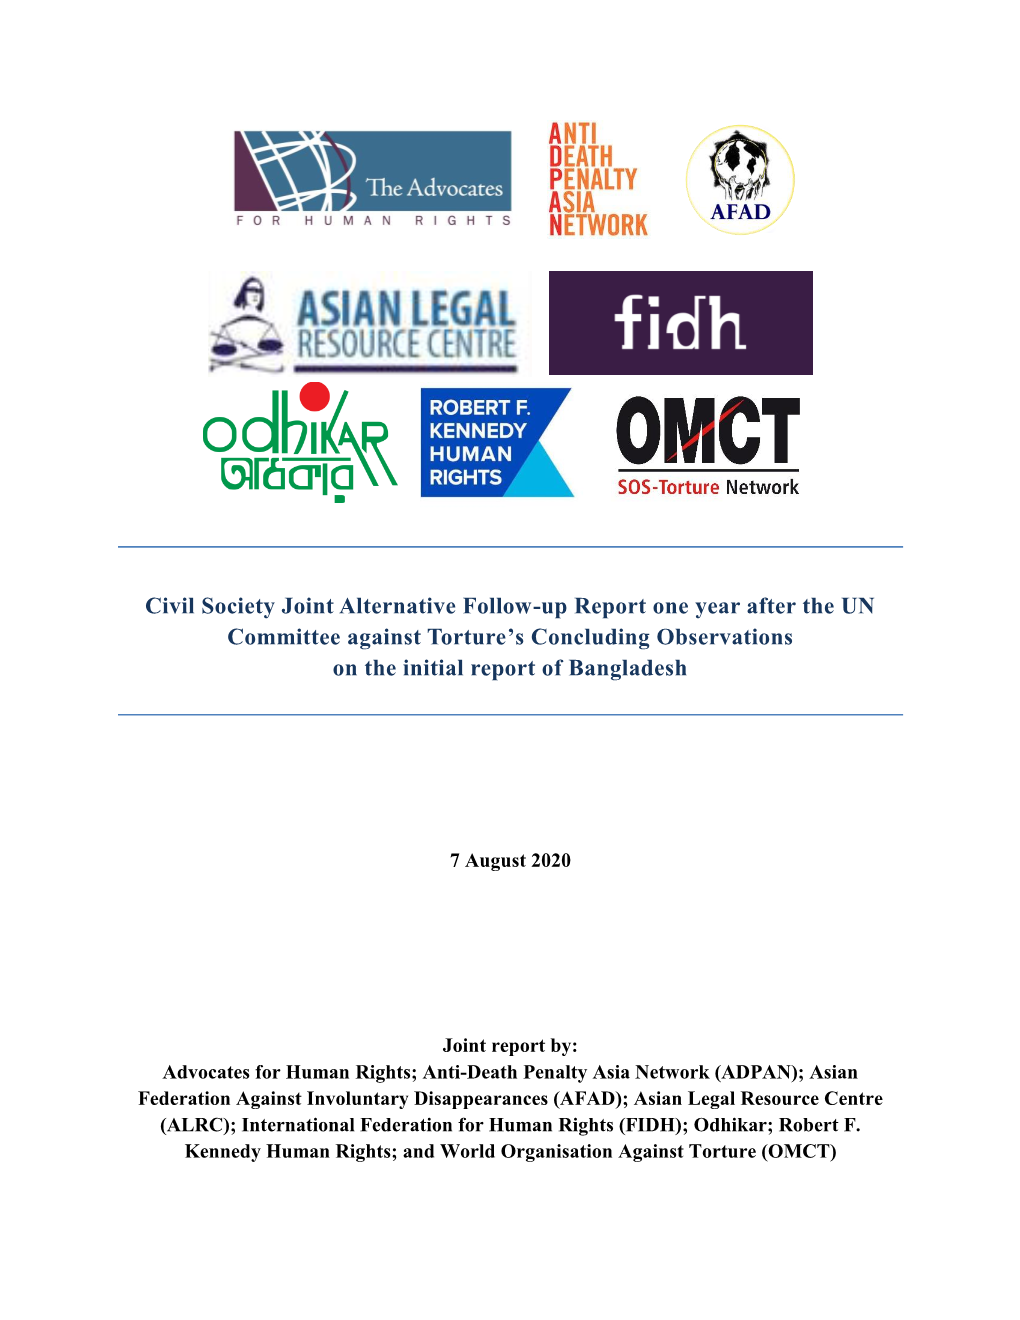 Civil Society Joint Alternative Follow-Up Report One Year After the UN Committee Against Torture’S Concluding Observations on the Initial Report of Bangladesh